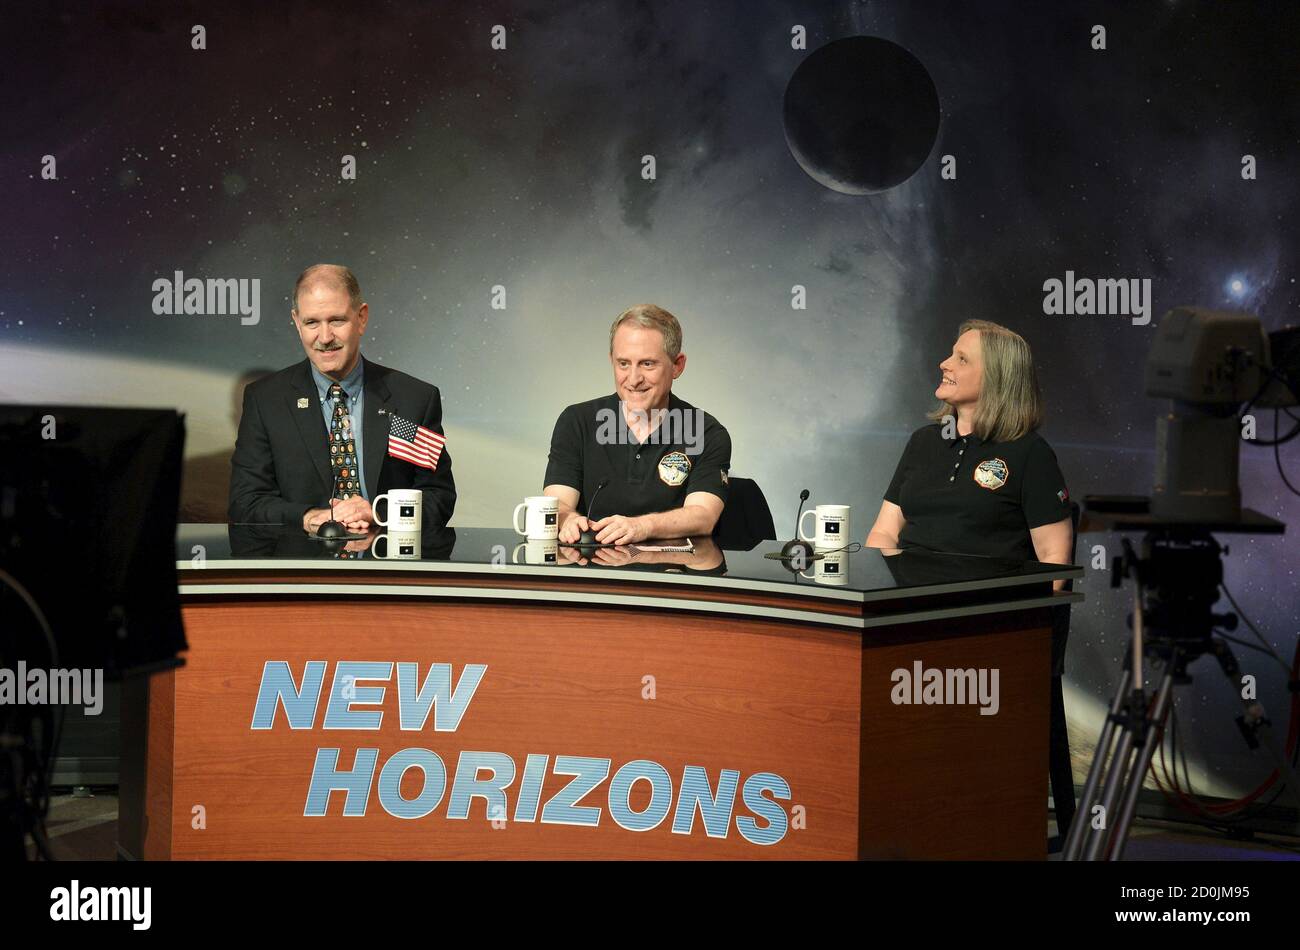 NASA Principal Investigator for New Horizons mission Alan Stern (C) is joined by Associate Administrator John Grunsfeld (L) and Mission Operations Manager Alice Bowman for a news conference as the spacecraft New Horizons approaches a flyby of Pluto, at NASA's Johns Hopkins Applied Physics Laboratory in Laurel, Maryland, July 14, 2015. More than nine years after its launch, a U.S. spacecraft sailed past Pluto on Tuesday, capping a 3 billion mile (4.88 billion km) journey to the solar system’s farthest reaches, NASA said. The craft flew by the distant 'dwarf' planet at 7:49 a.m. after reaching a Stock Photo